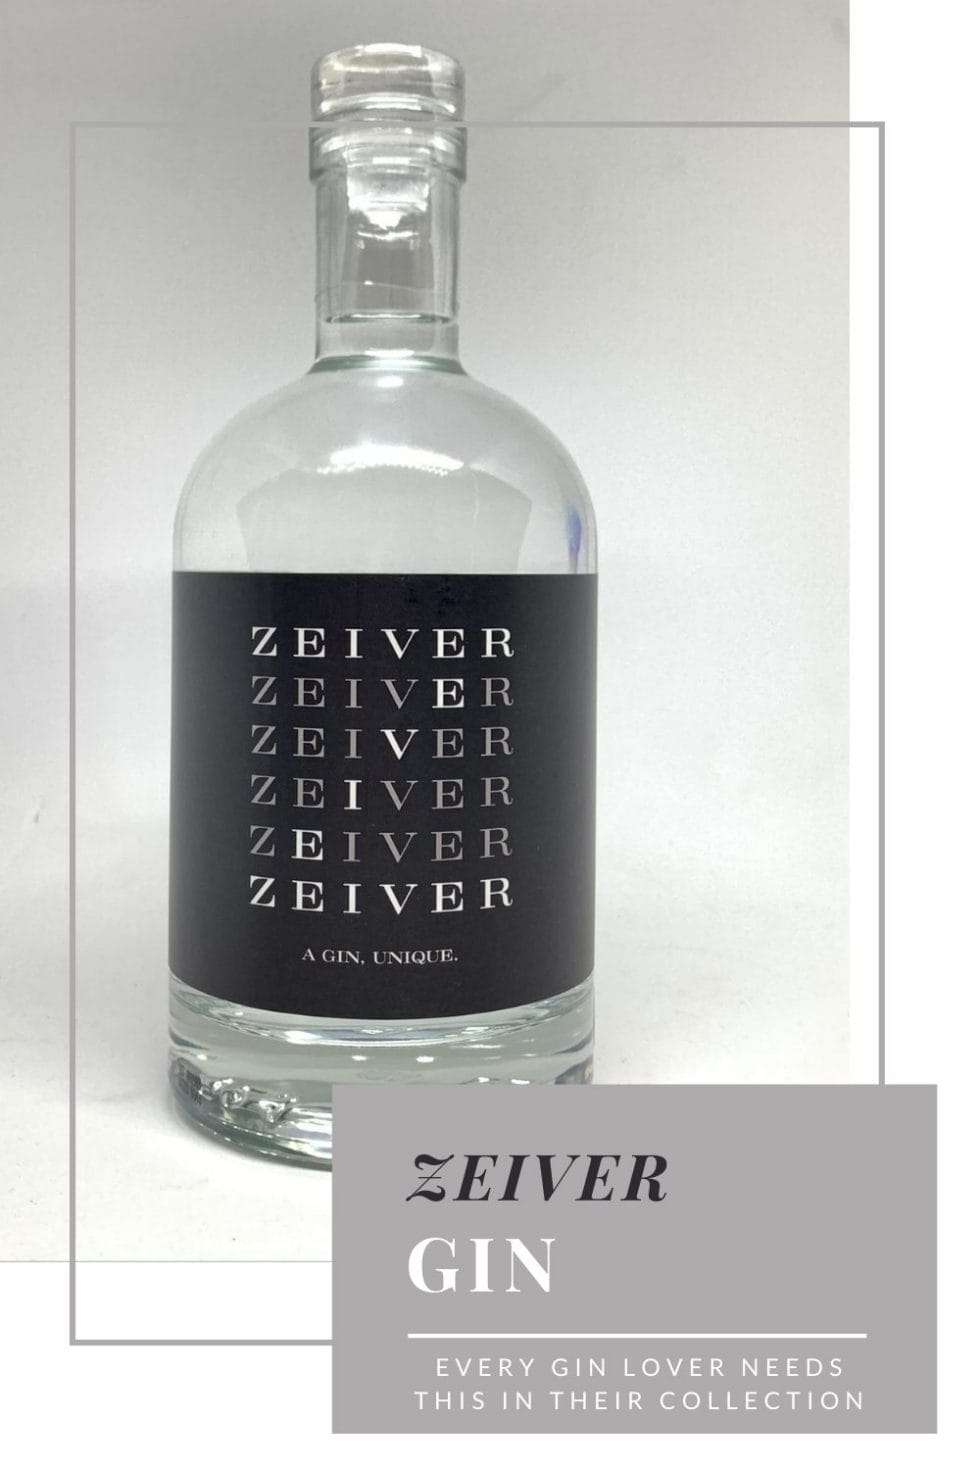 Zeiver gin - tasting and review